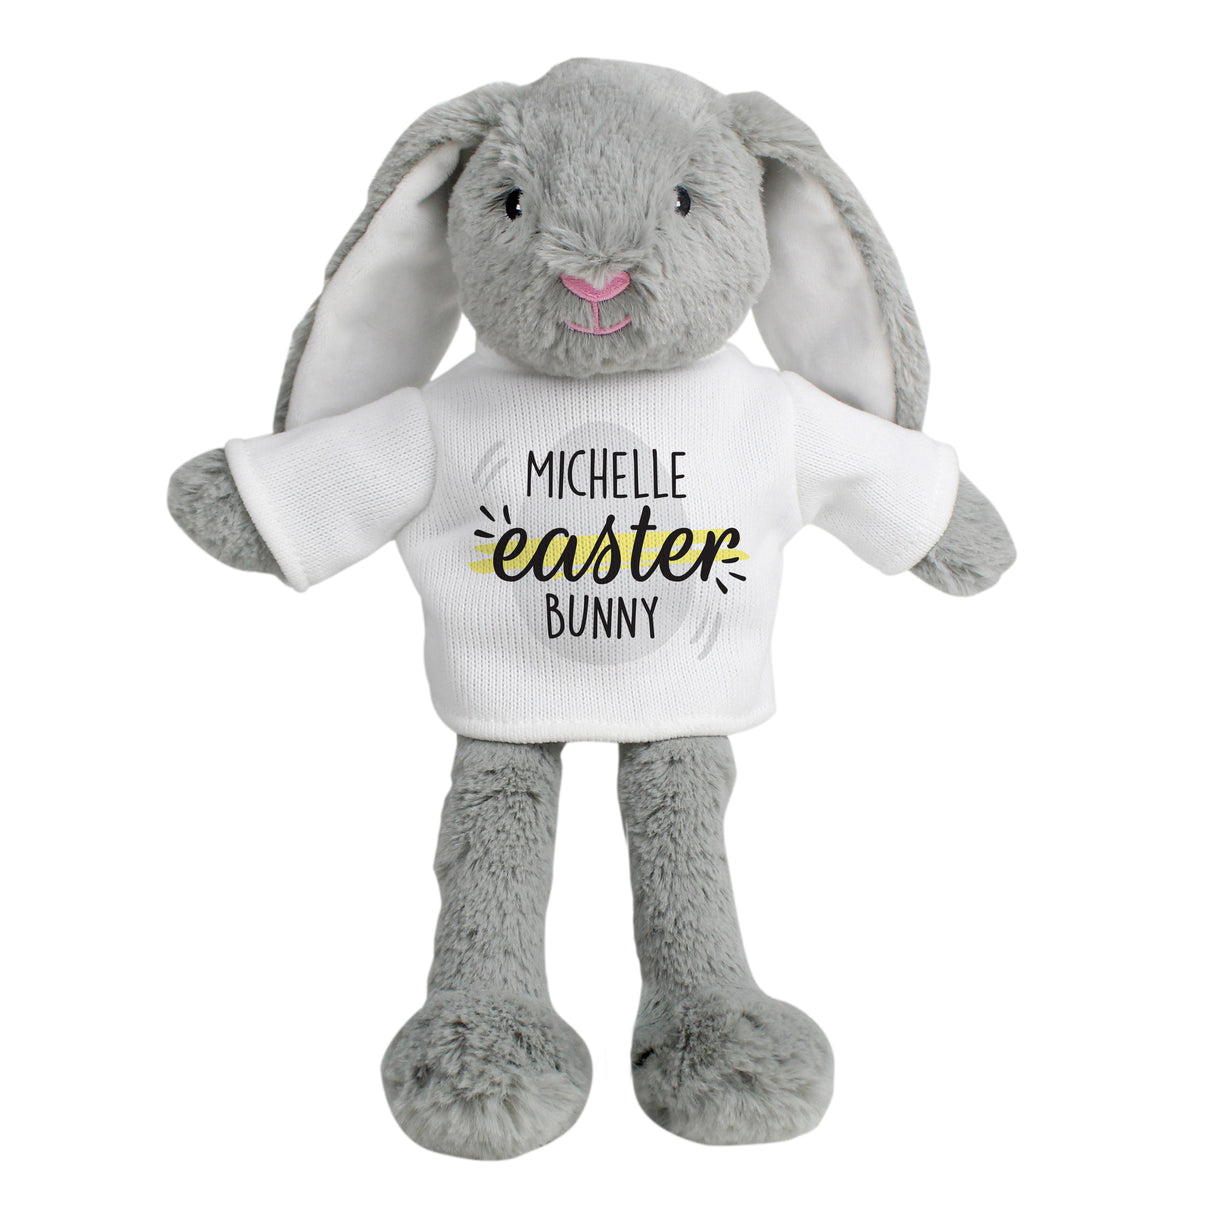 Easter Bunny Soft Teddy - Personalised